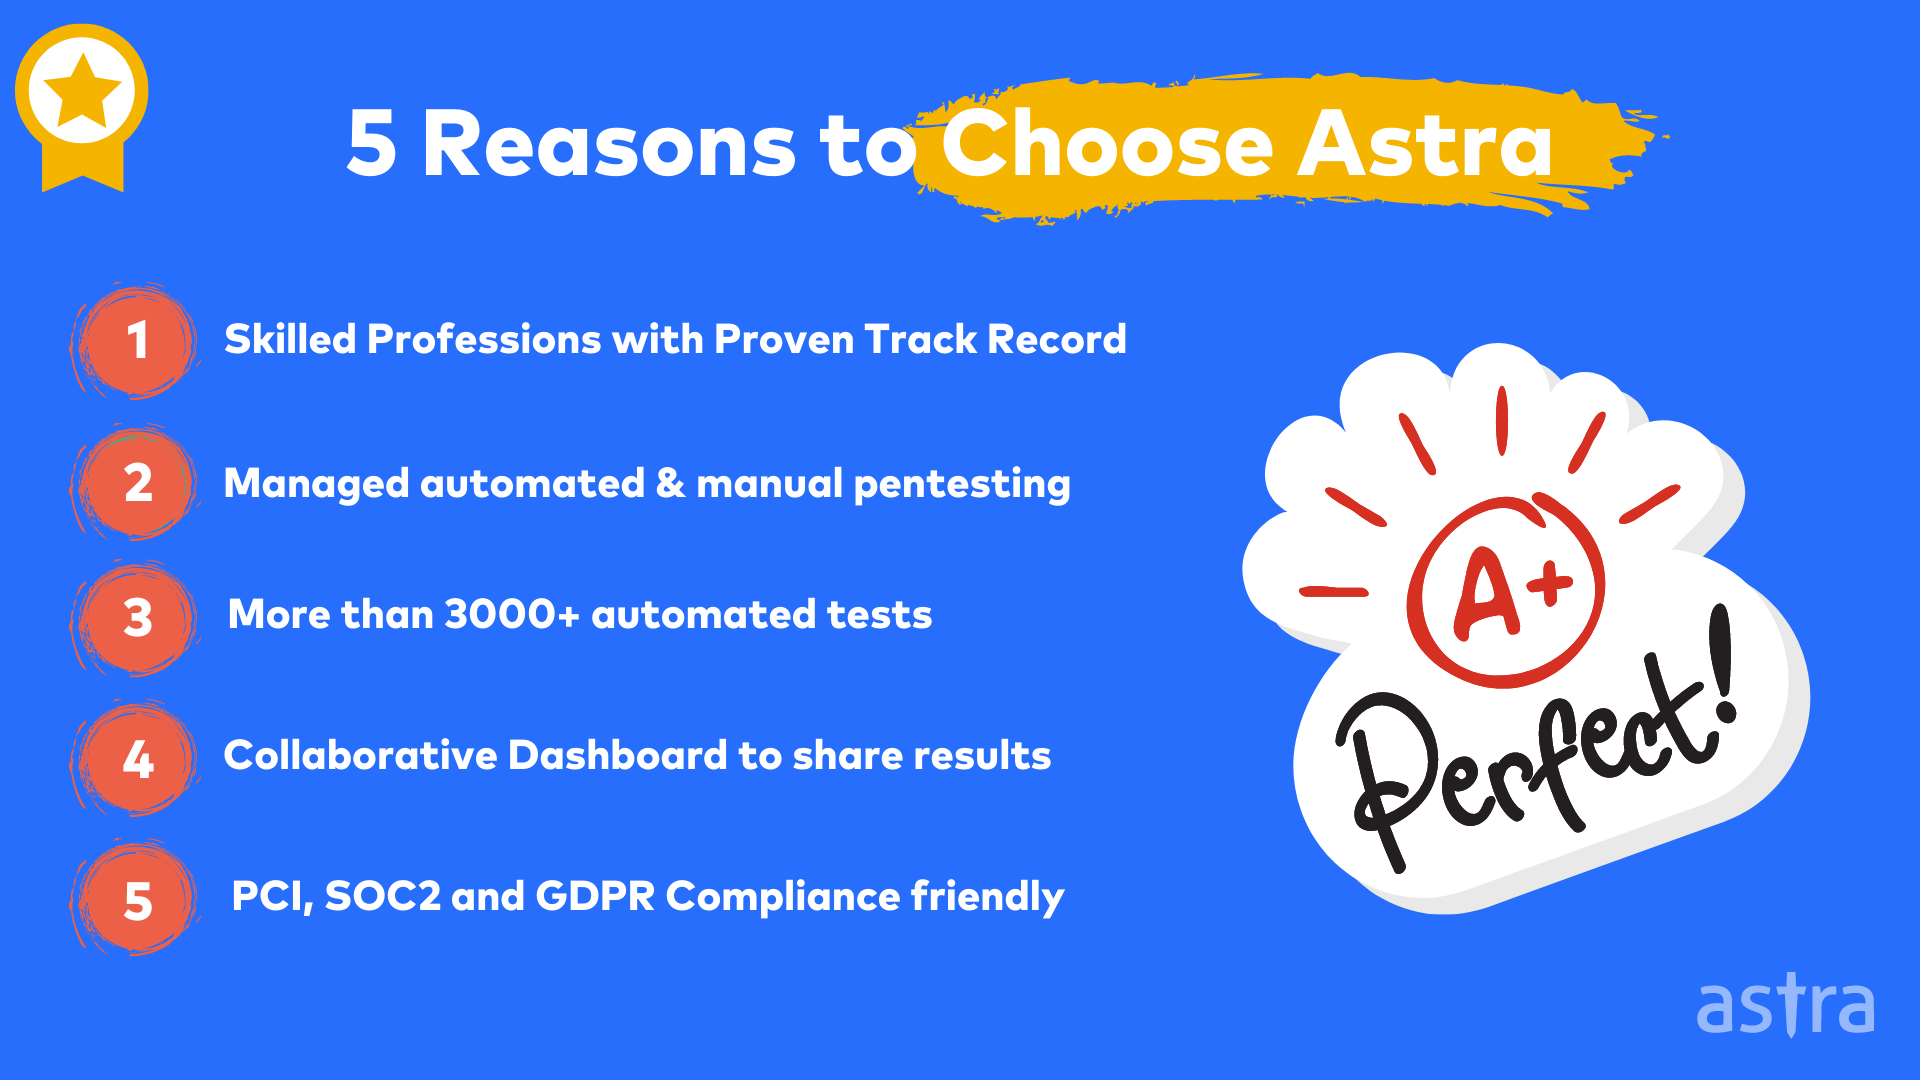 5 Reasons to choose Astra